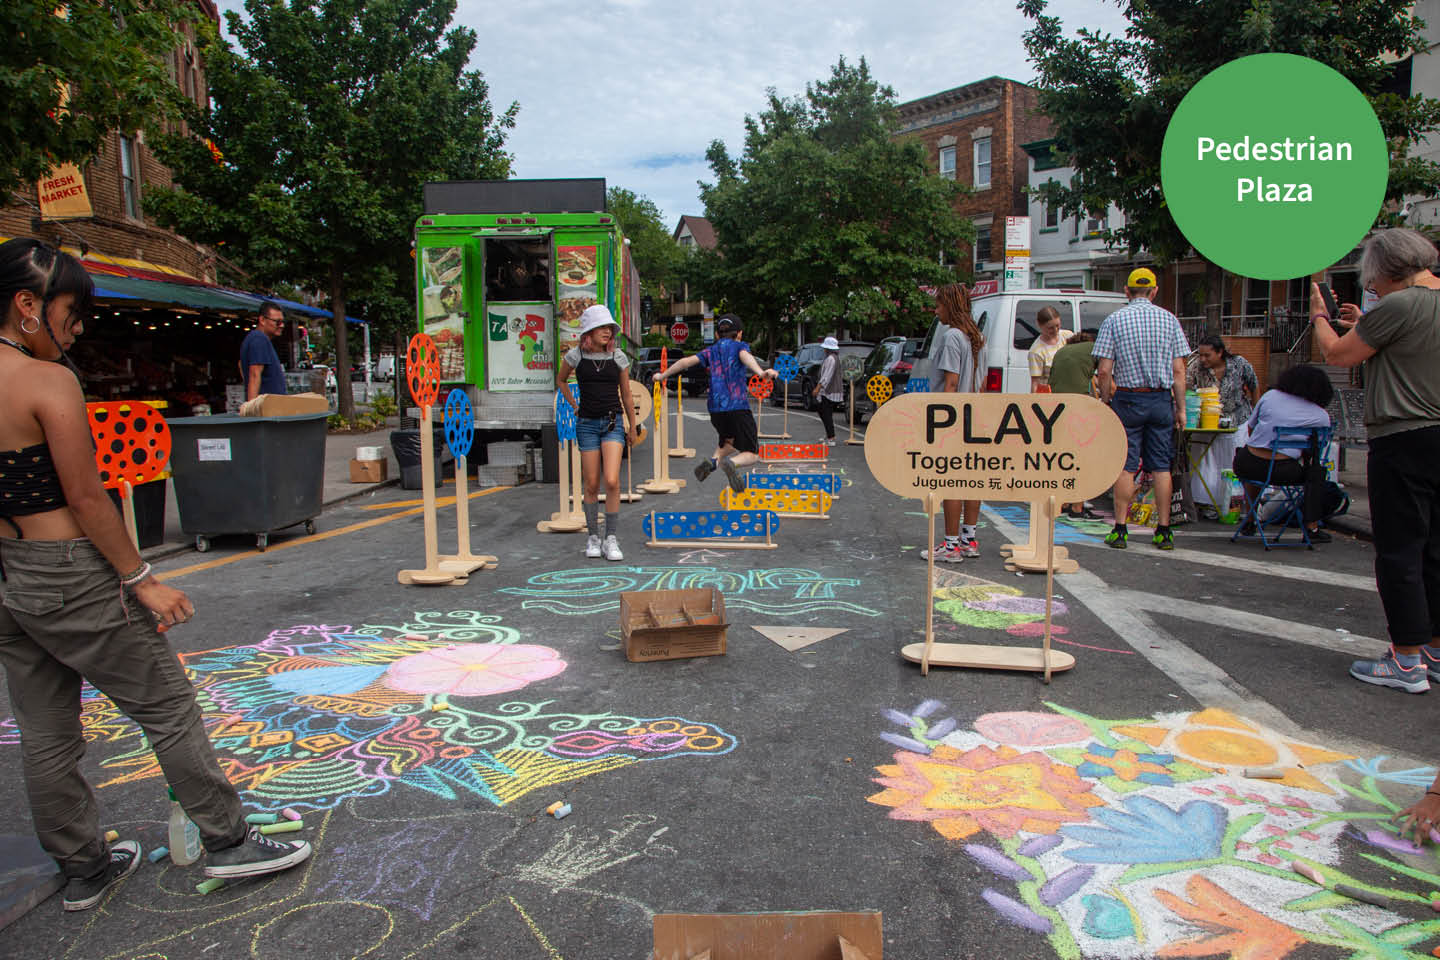 A view of people chalking on the street in NYC. There is sign that says "PLAY." The button on the top right corner reads "Pedestrian Plaza."